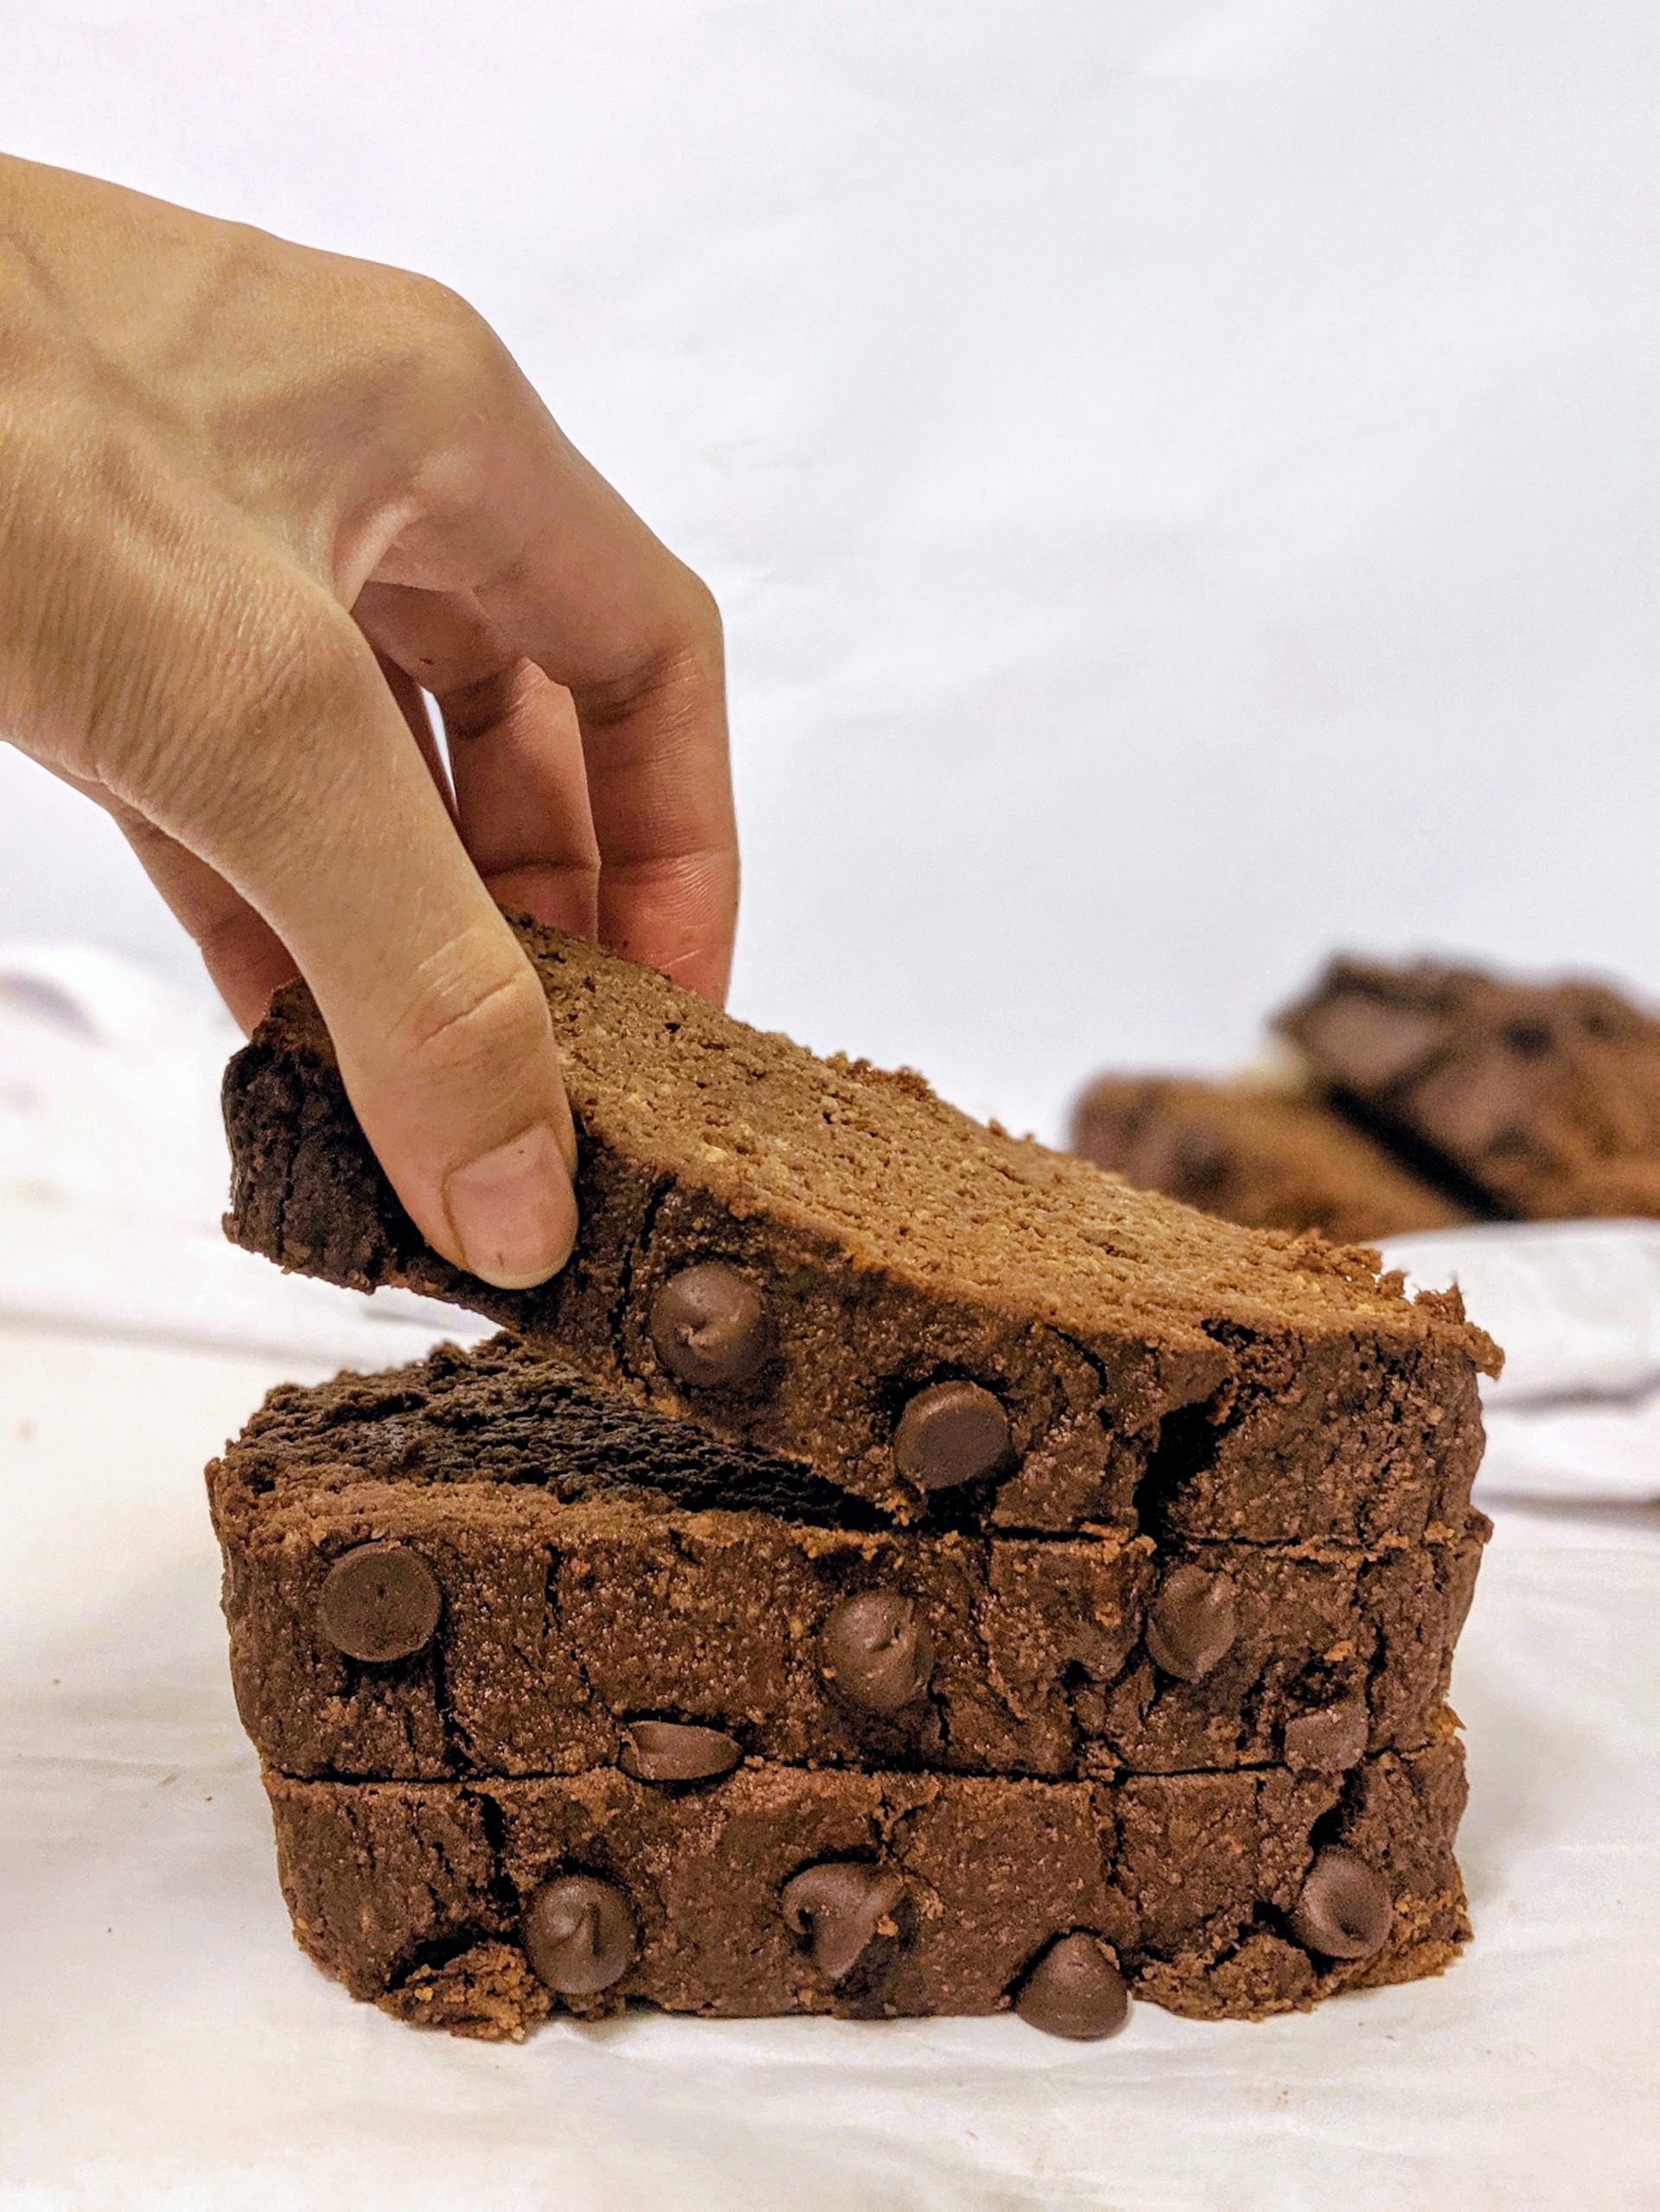 This Chocolate Banana Bread is the undoubtedly the most luscious chocolate-flavored and perfectly moist loaf you’re ever going to come across, and gluten-free too. Naturally sweetened by the banana, its a great option for breakfast, dessert, or even a midday snack.